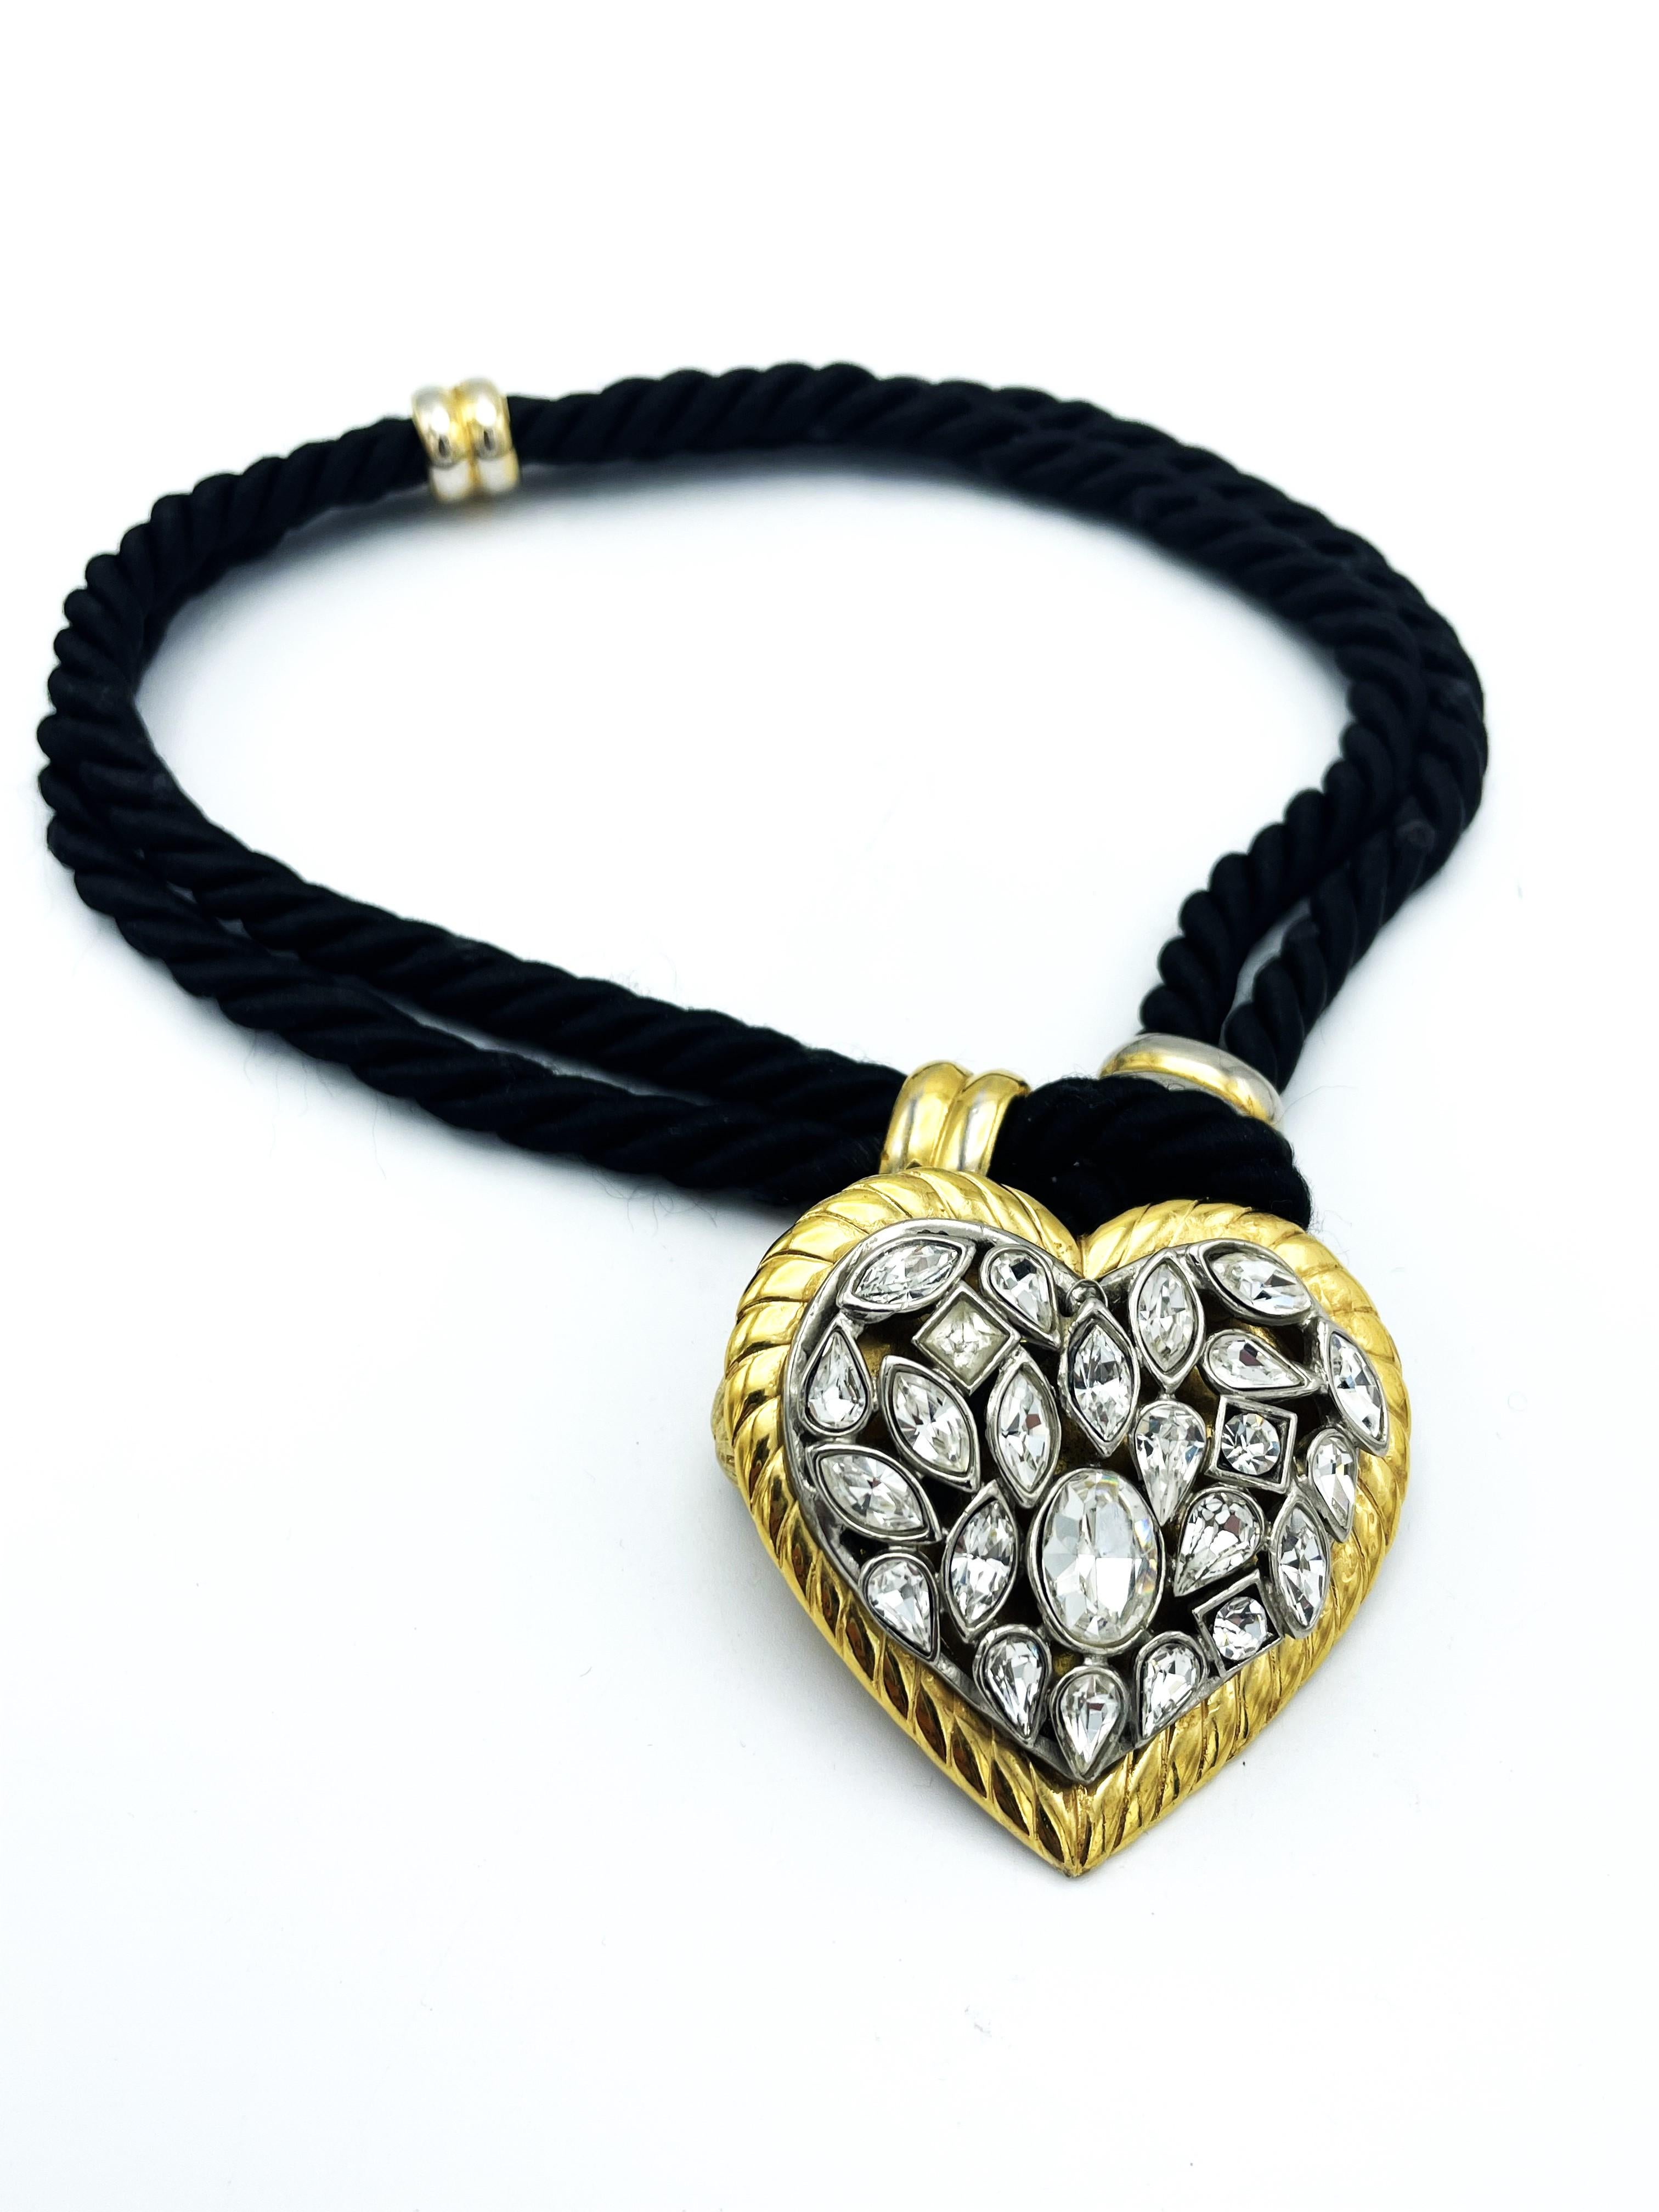 Yves Saint Laurent rhinestone Heart hanging from a double black cord, 1980s For Sale 3